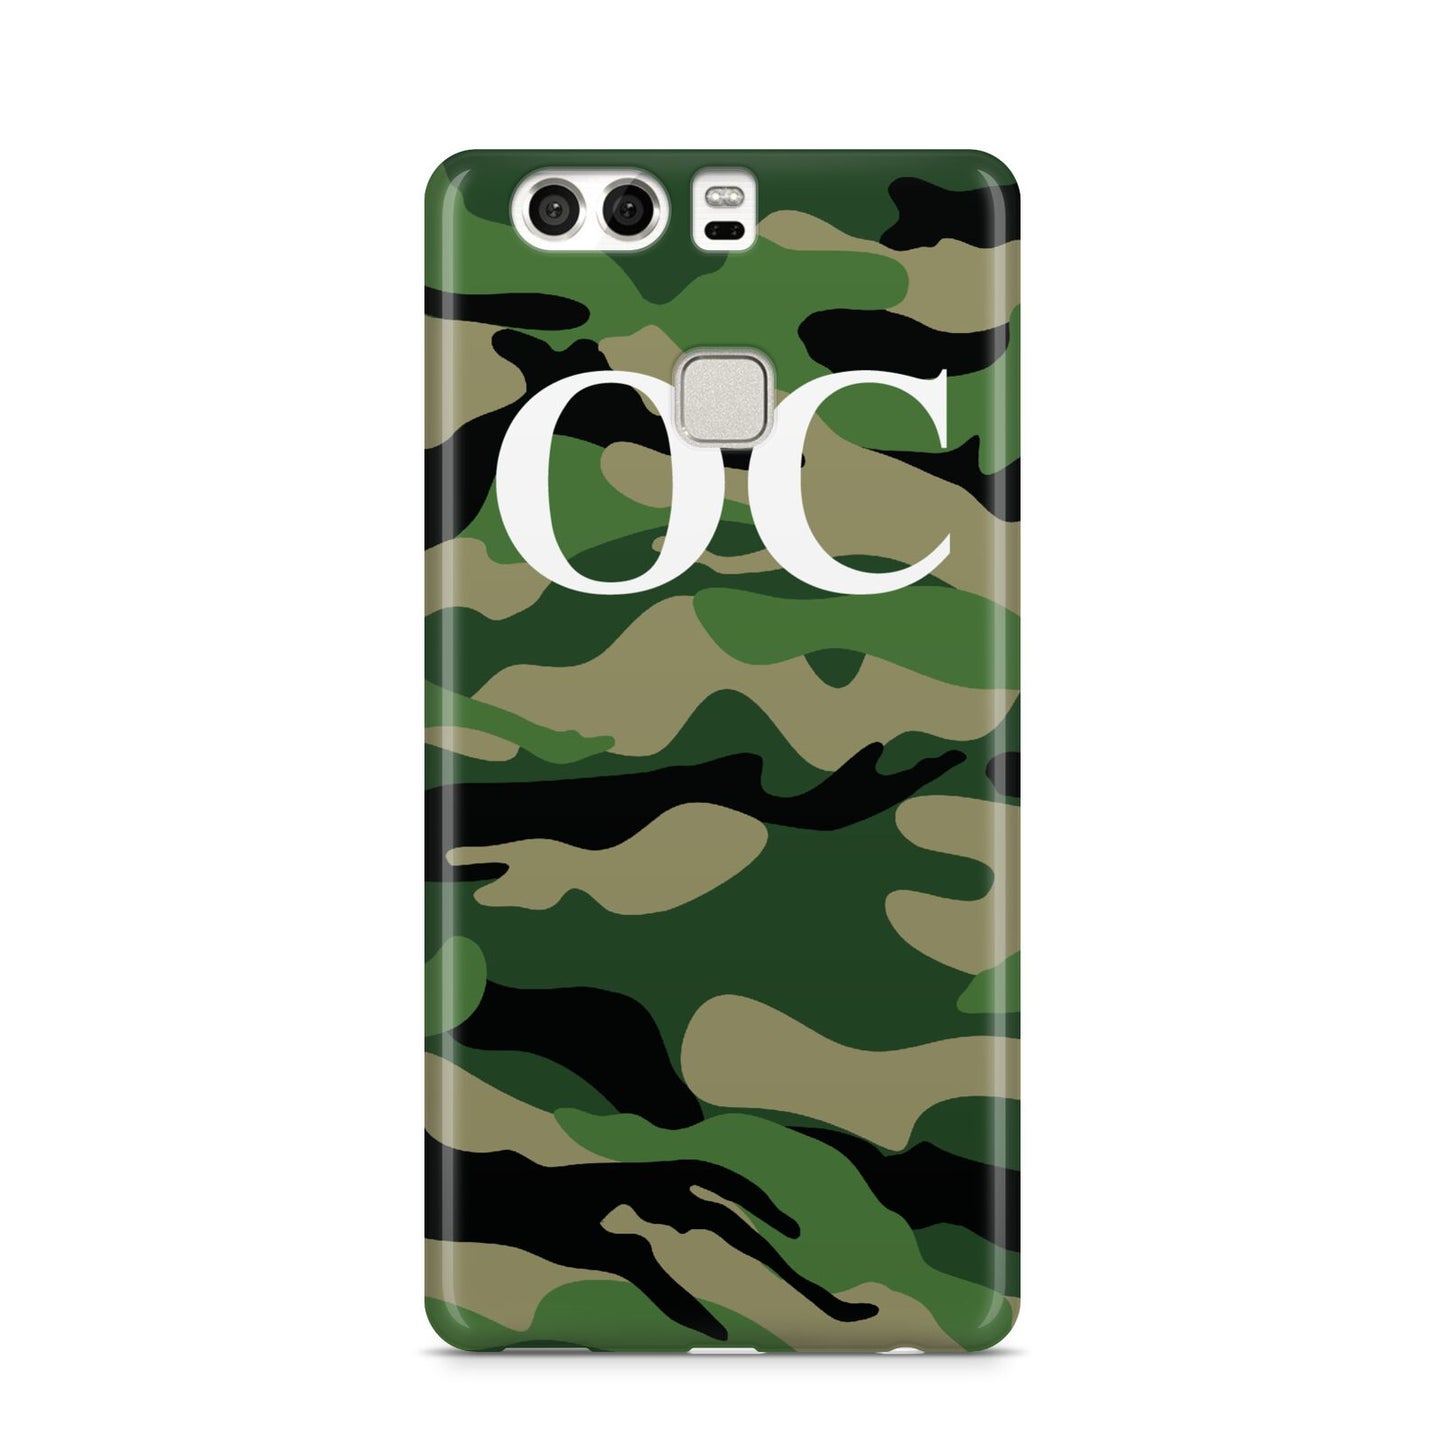 Personalised Camouflage Huawei P9 Case